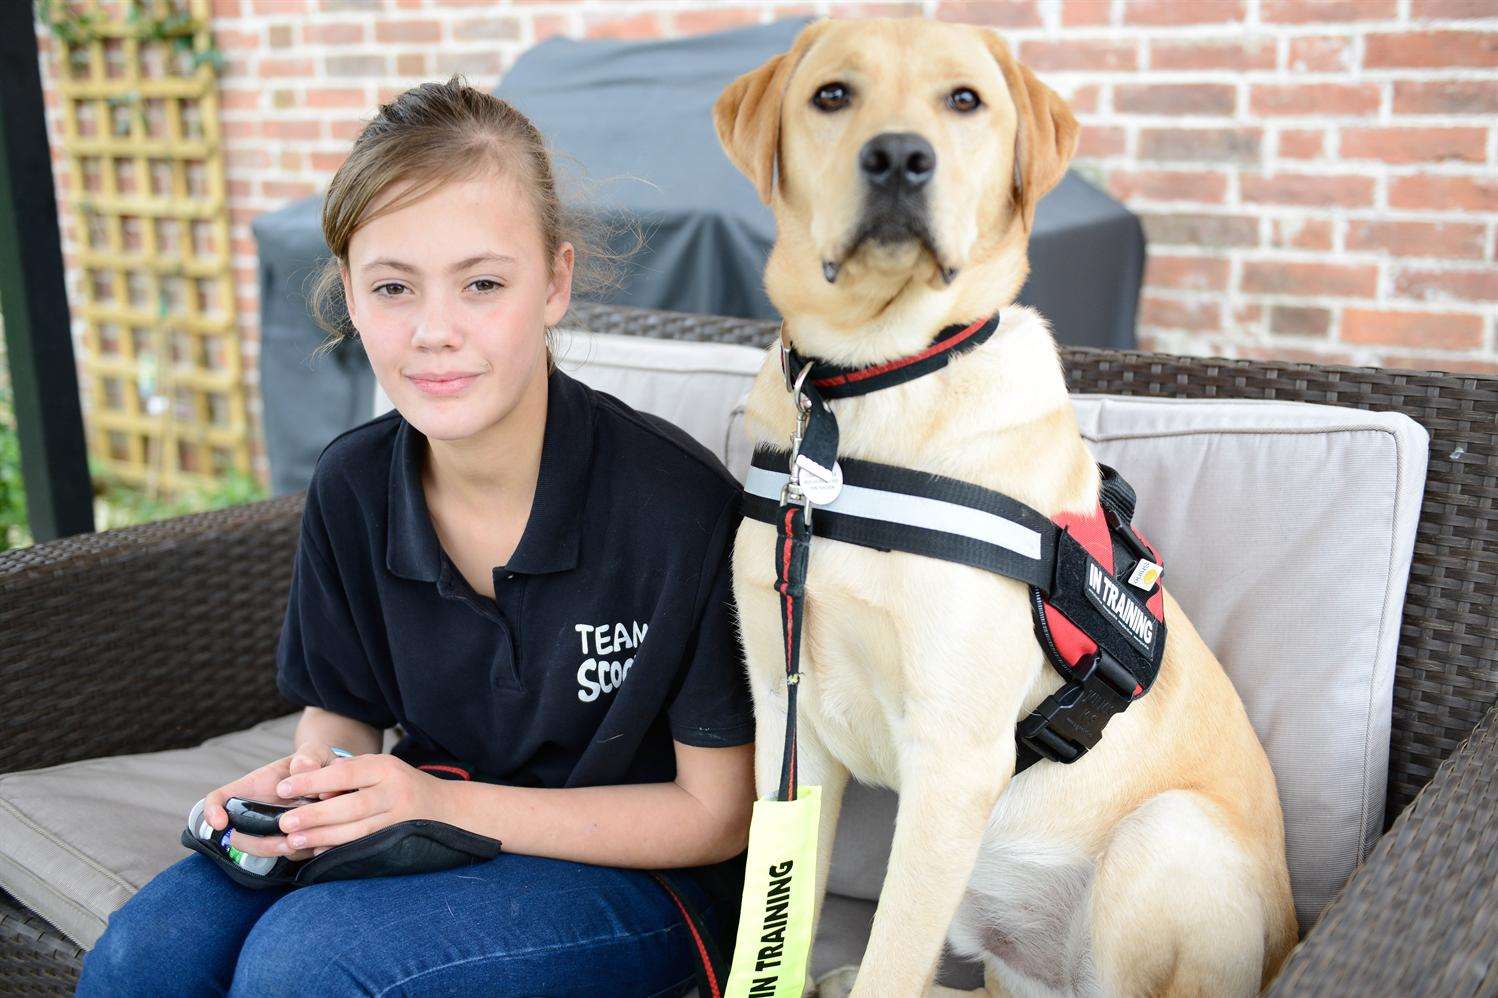 Sophie-Alice Pearman, 11, checks her sugar levels with Scooby her medical assistance dog.